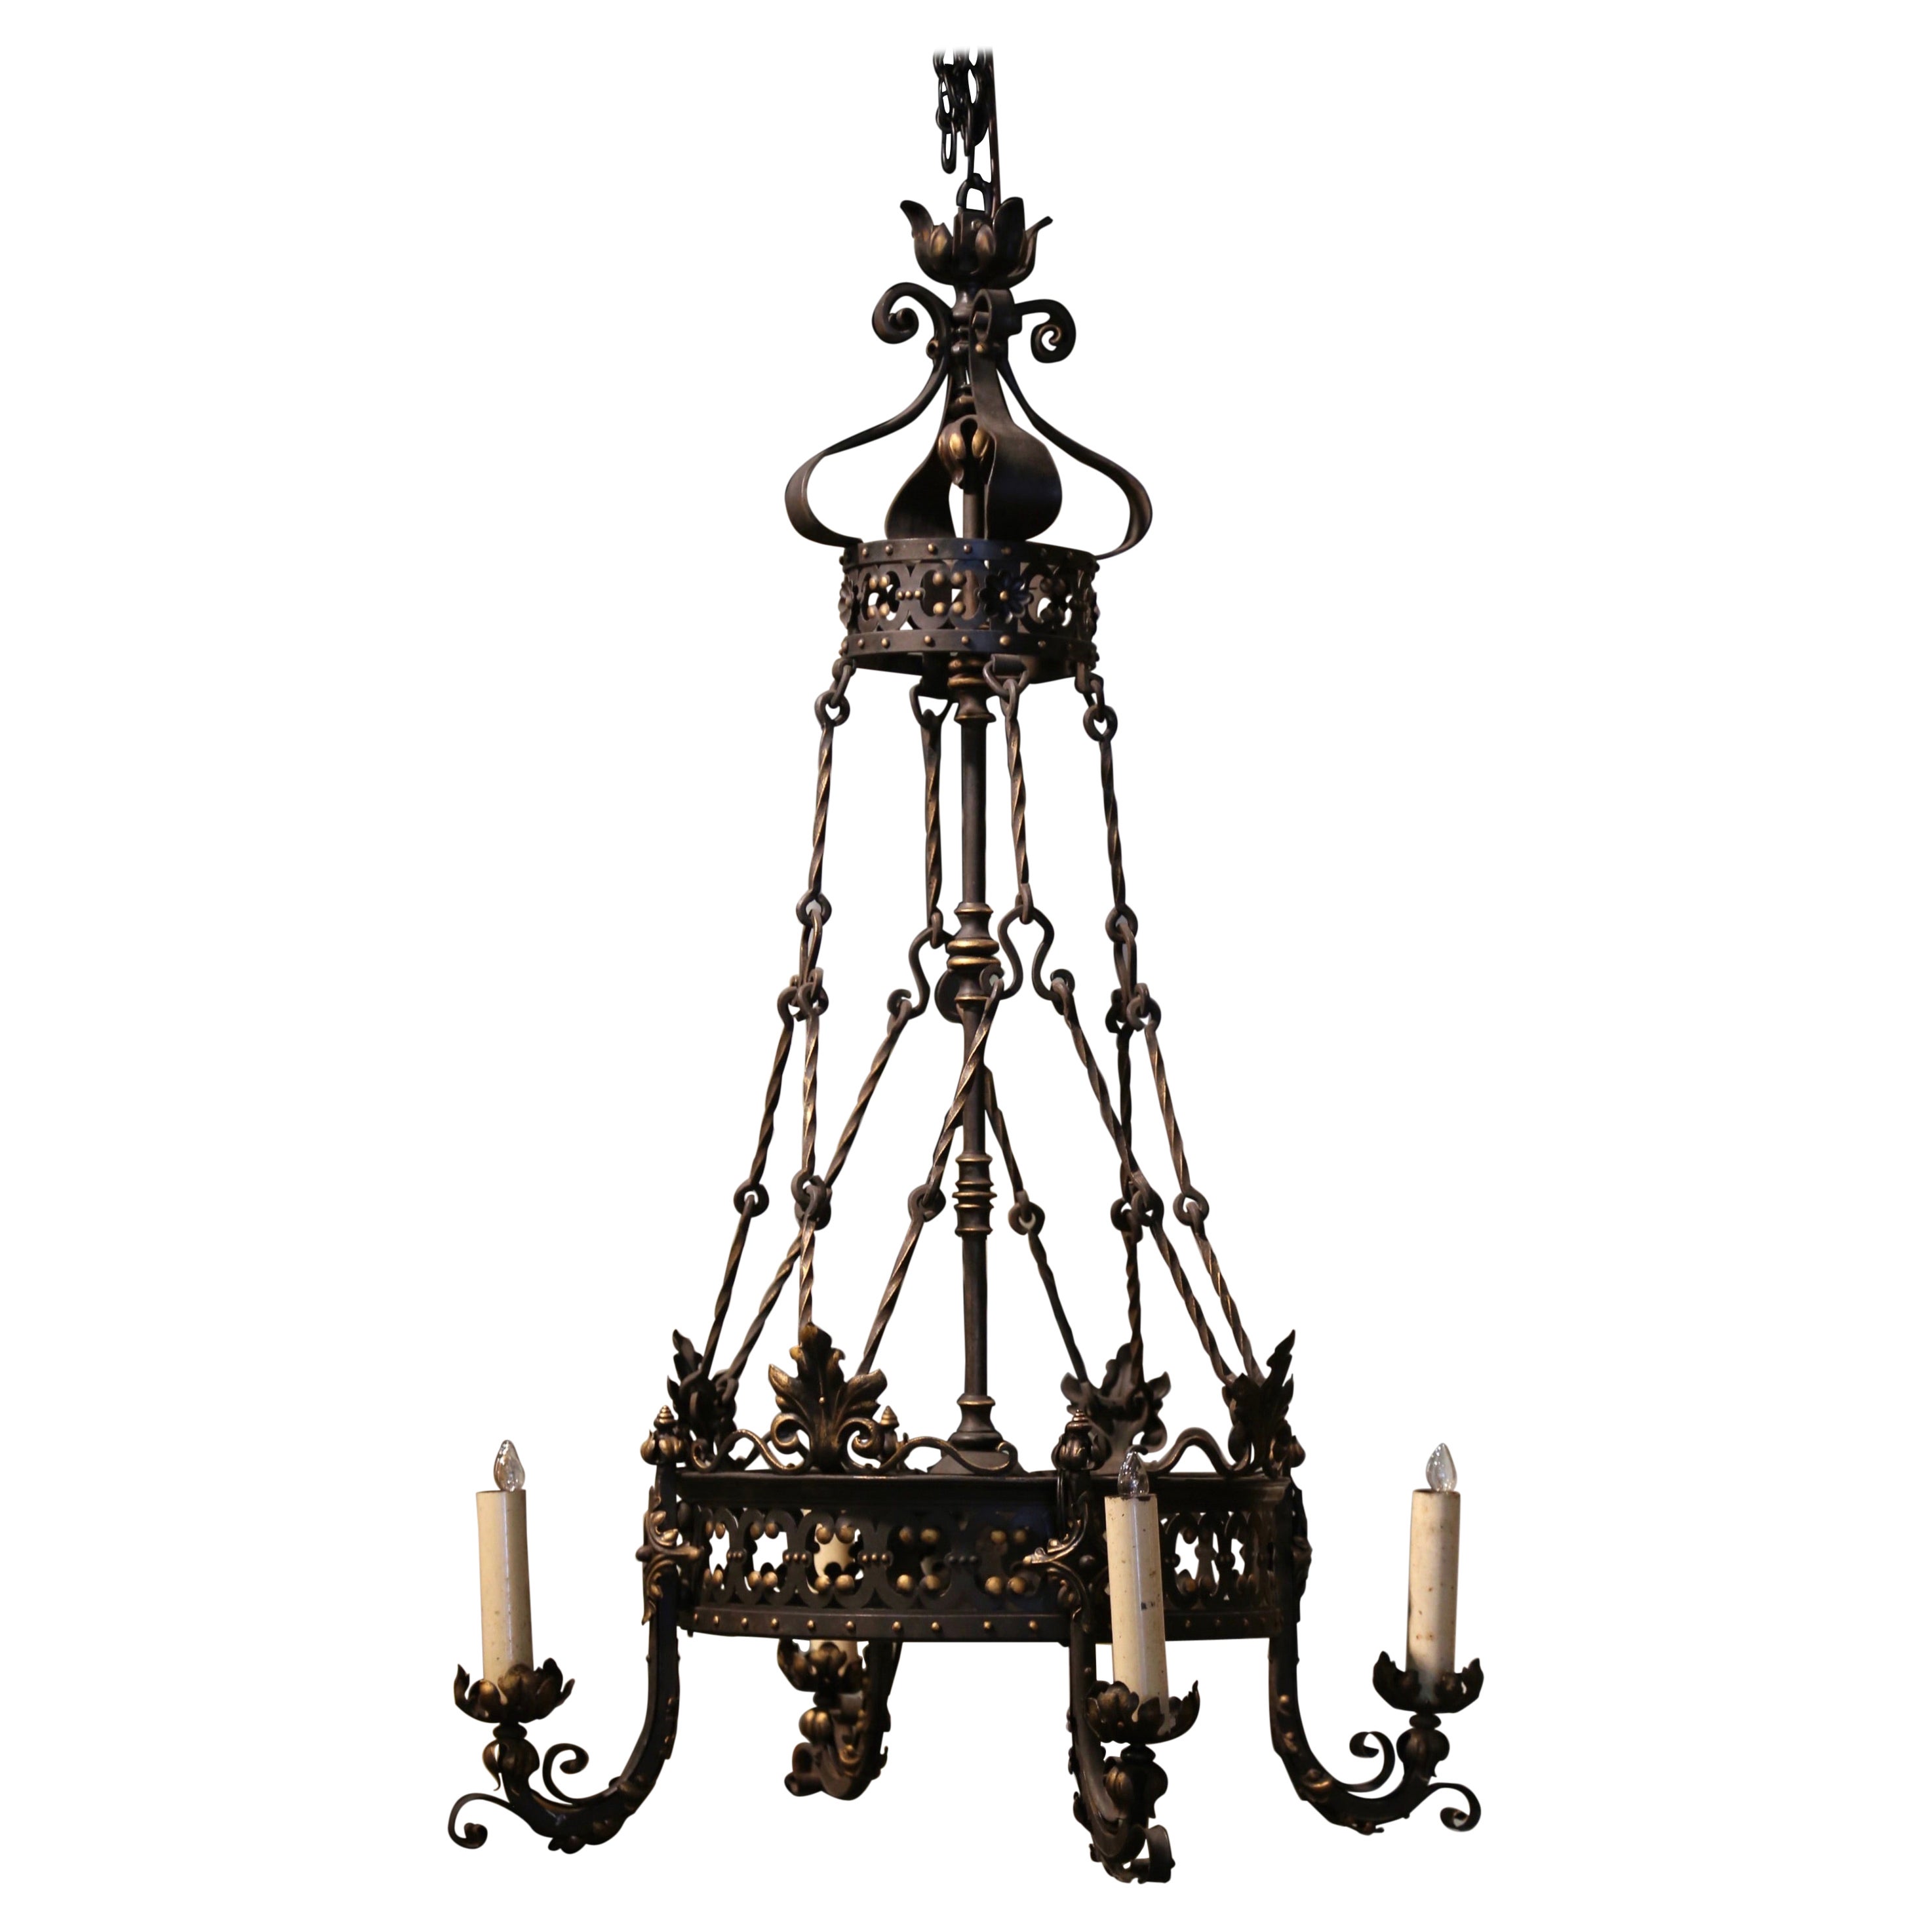 19th Century French Gothic Black and Gilt Wrought Iron Four-Light Chandelier